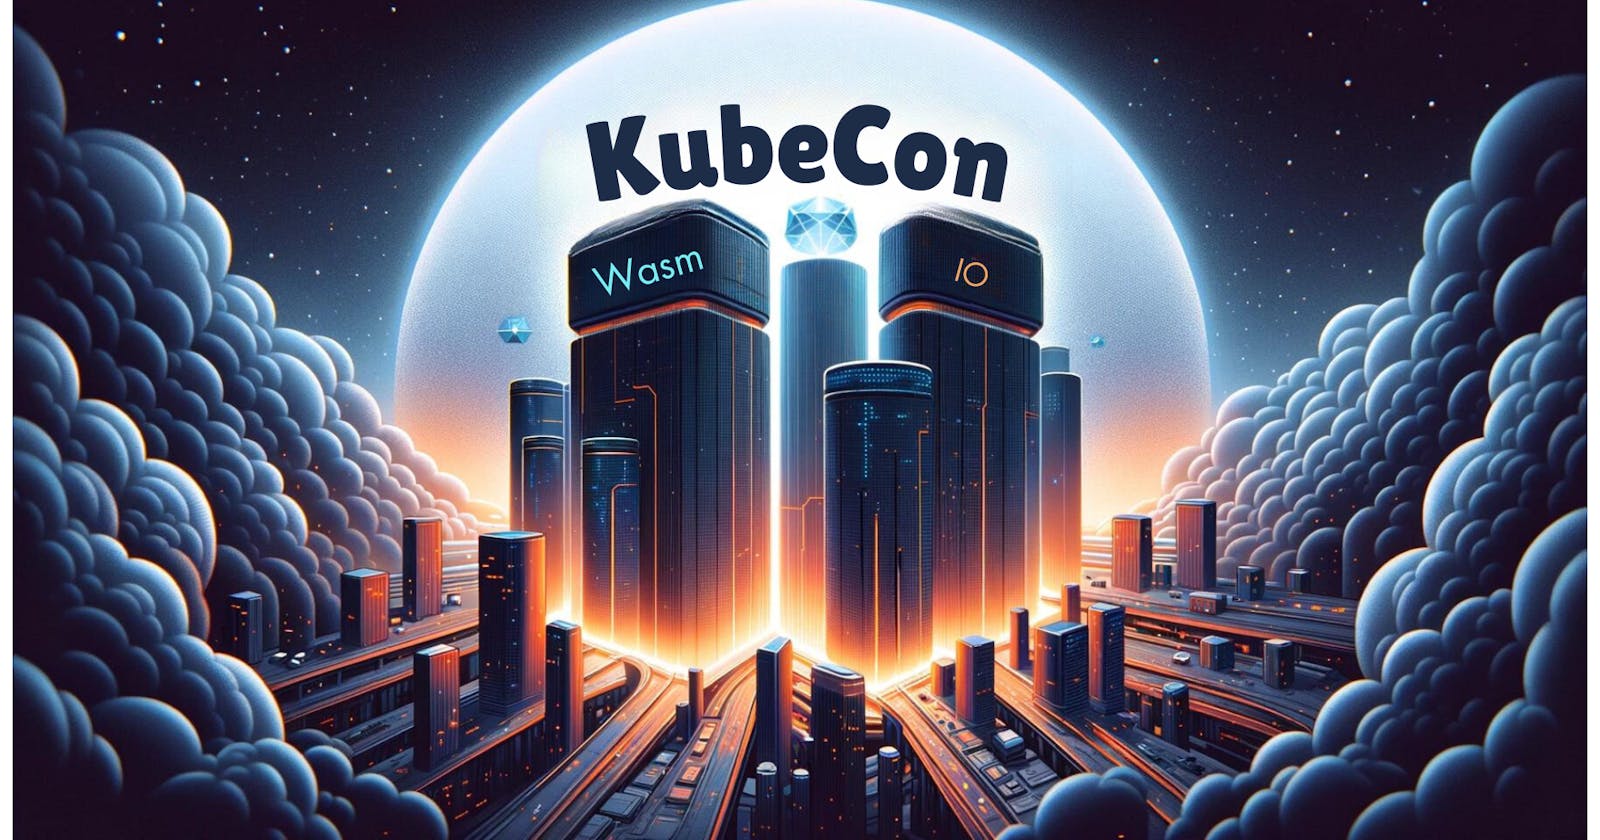 KubeCon + CloudNativeCon, Rejekts and Wasm I/O Wrap-Up: A Leap into the Future with WebAssembly, AI, and Sustainable Cloud Practices